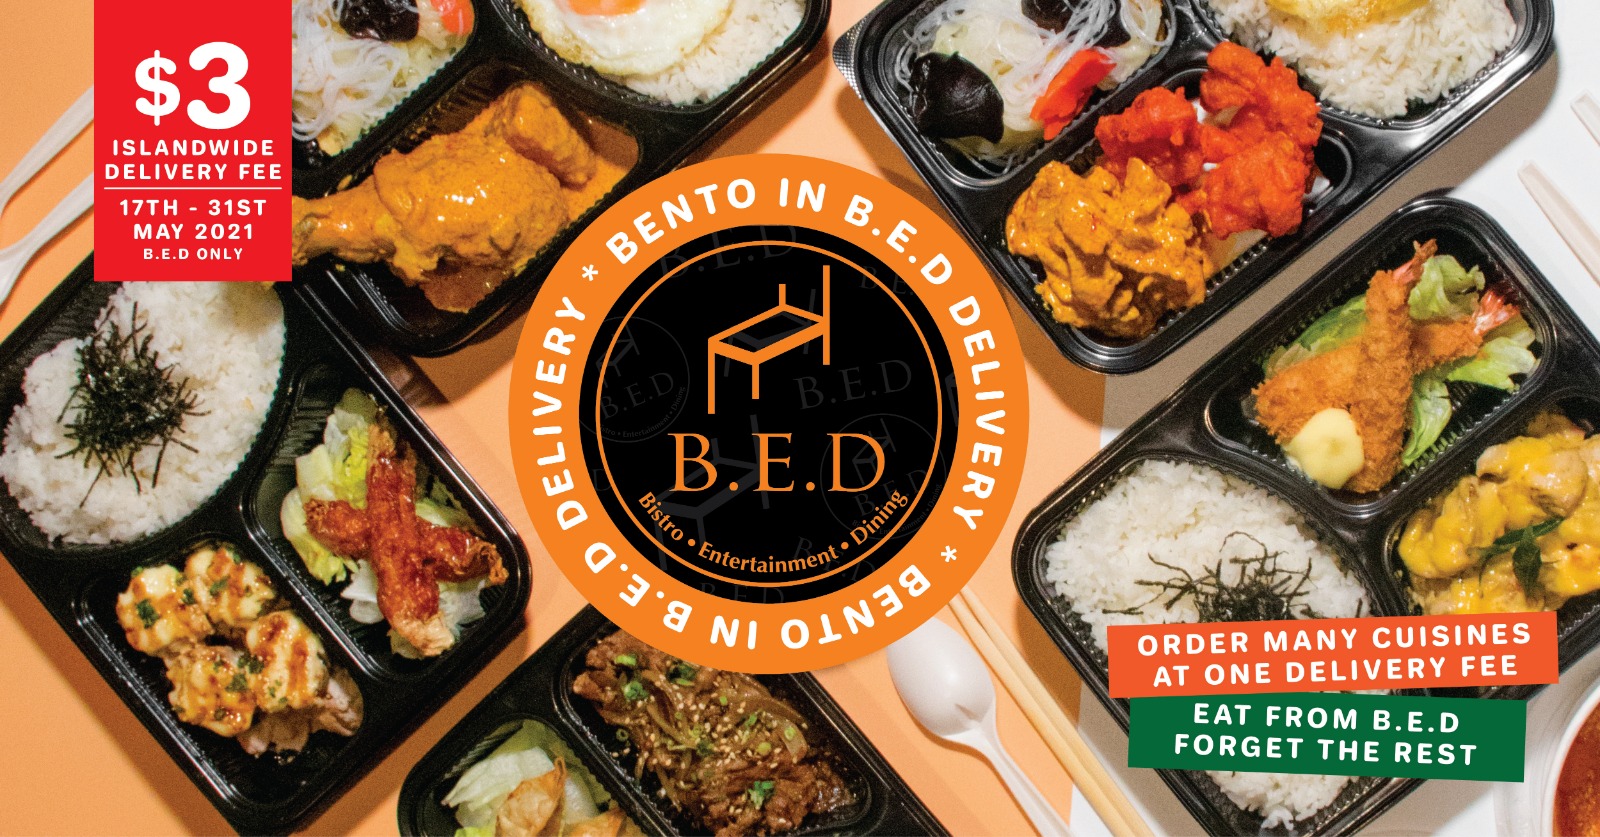 Modern Food Hall in Tai Seng lets you order multi-cuisines bentos for a flat $3 delivery fee